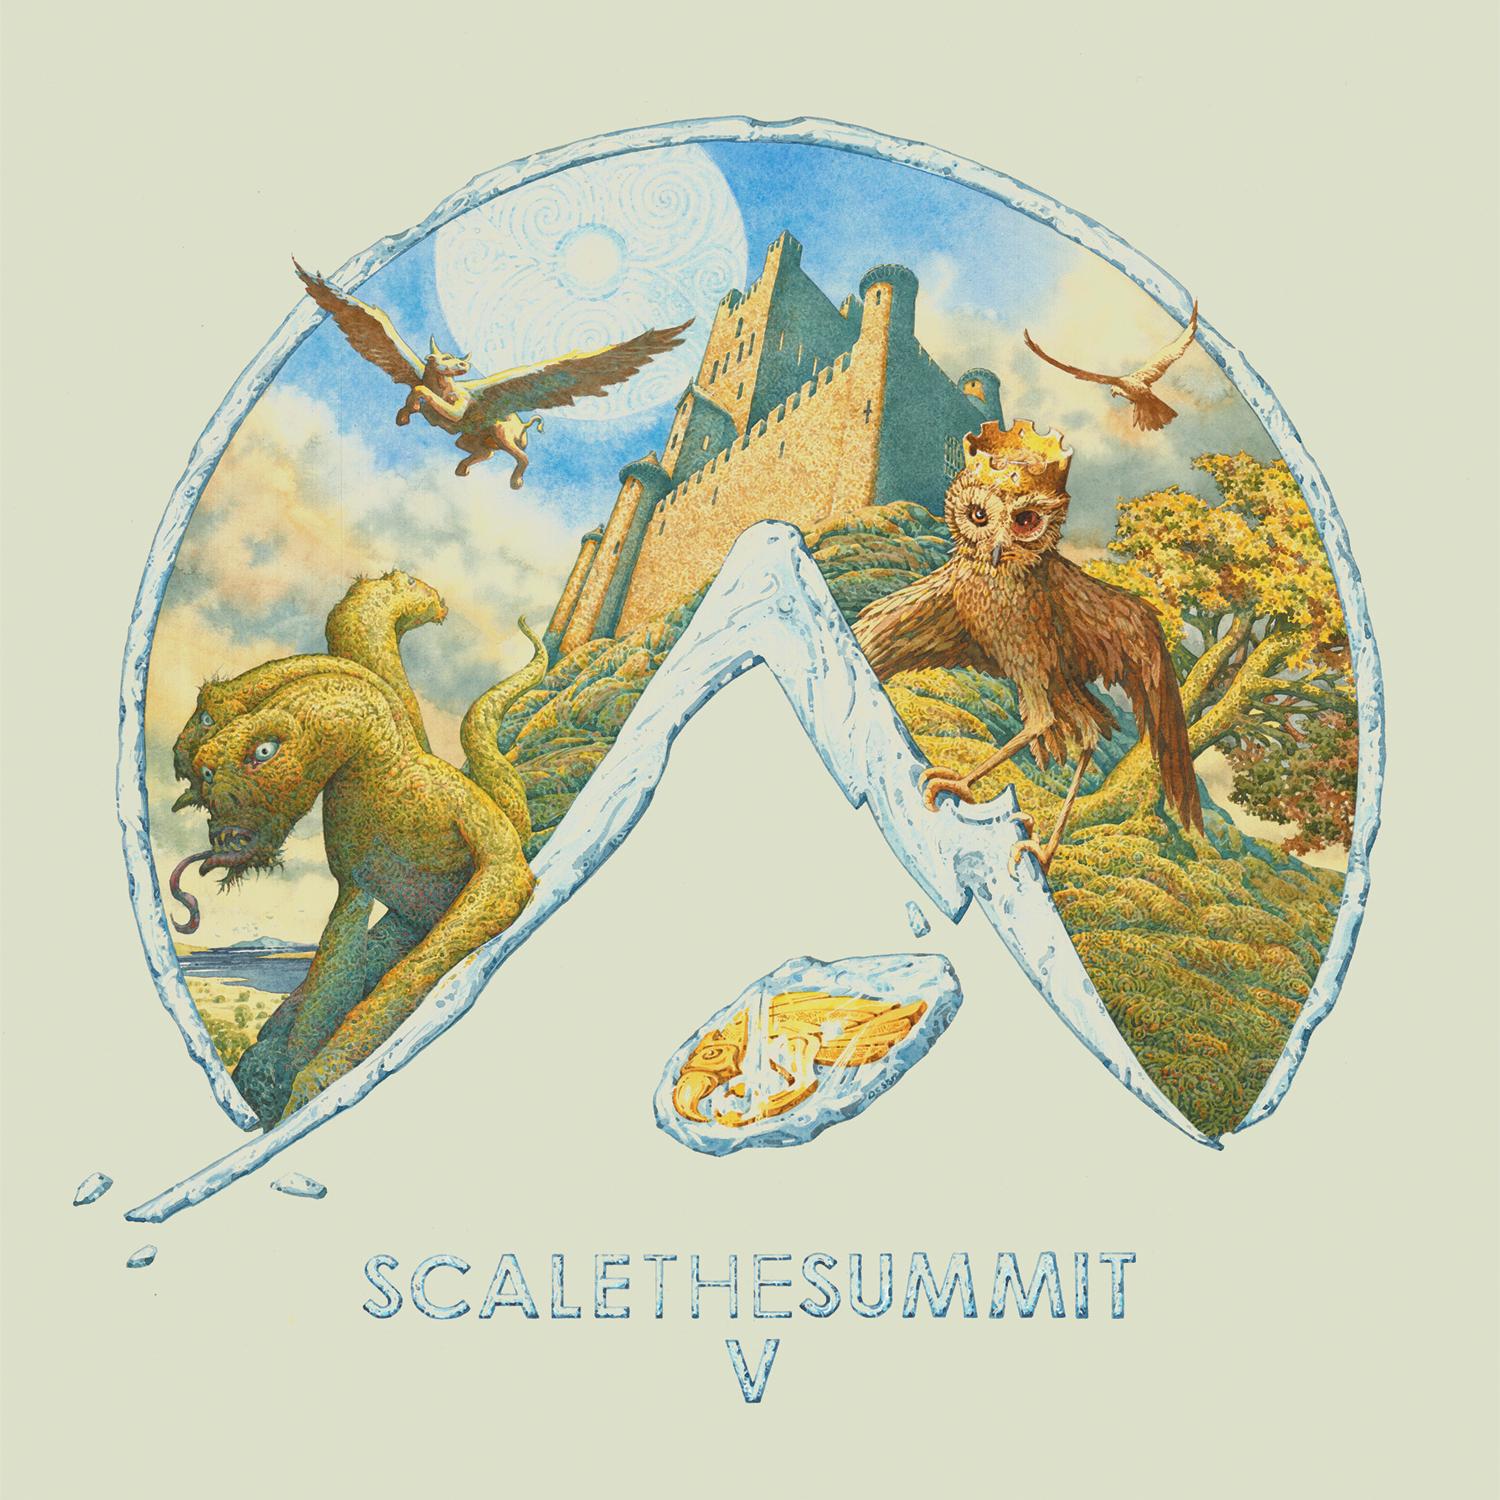 Scale The Summit - The Isle of Mull